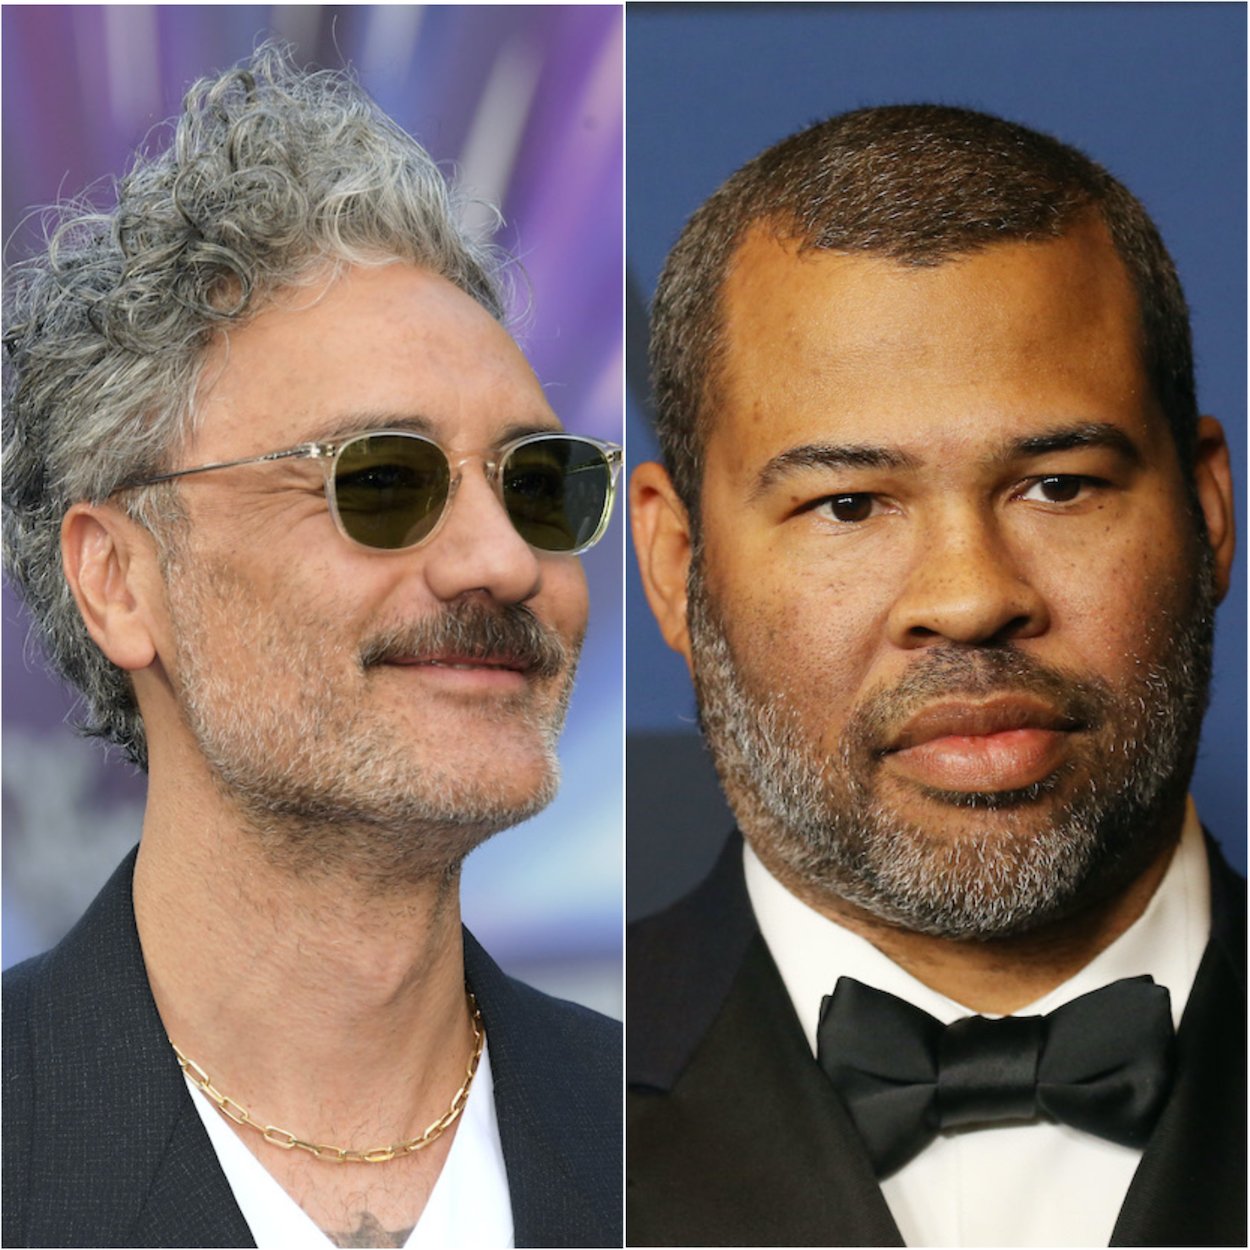 Taika Waititi (left) attends the UK premiere of 'Lightyear'; Jordan Peele arrives at the 2019 Academy Awards. Peele doesn't want to direct a live-action 'Akira,' but Waititi accepted the challenge of adapting the legendary anime classic.